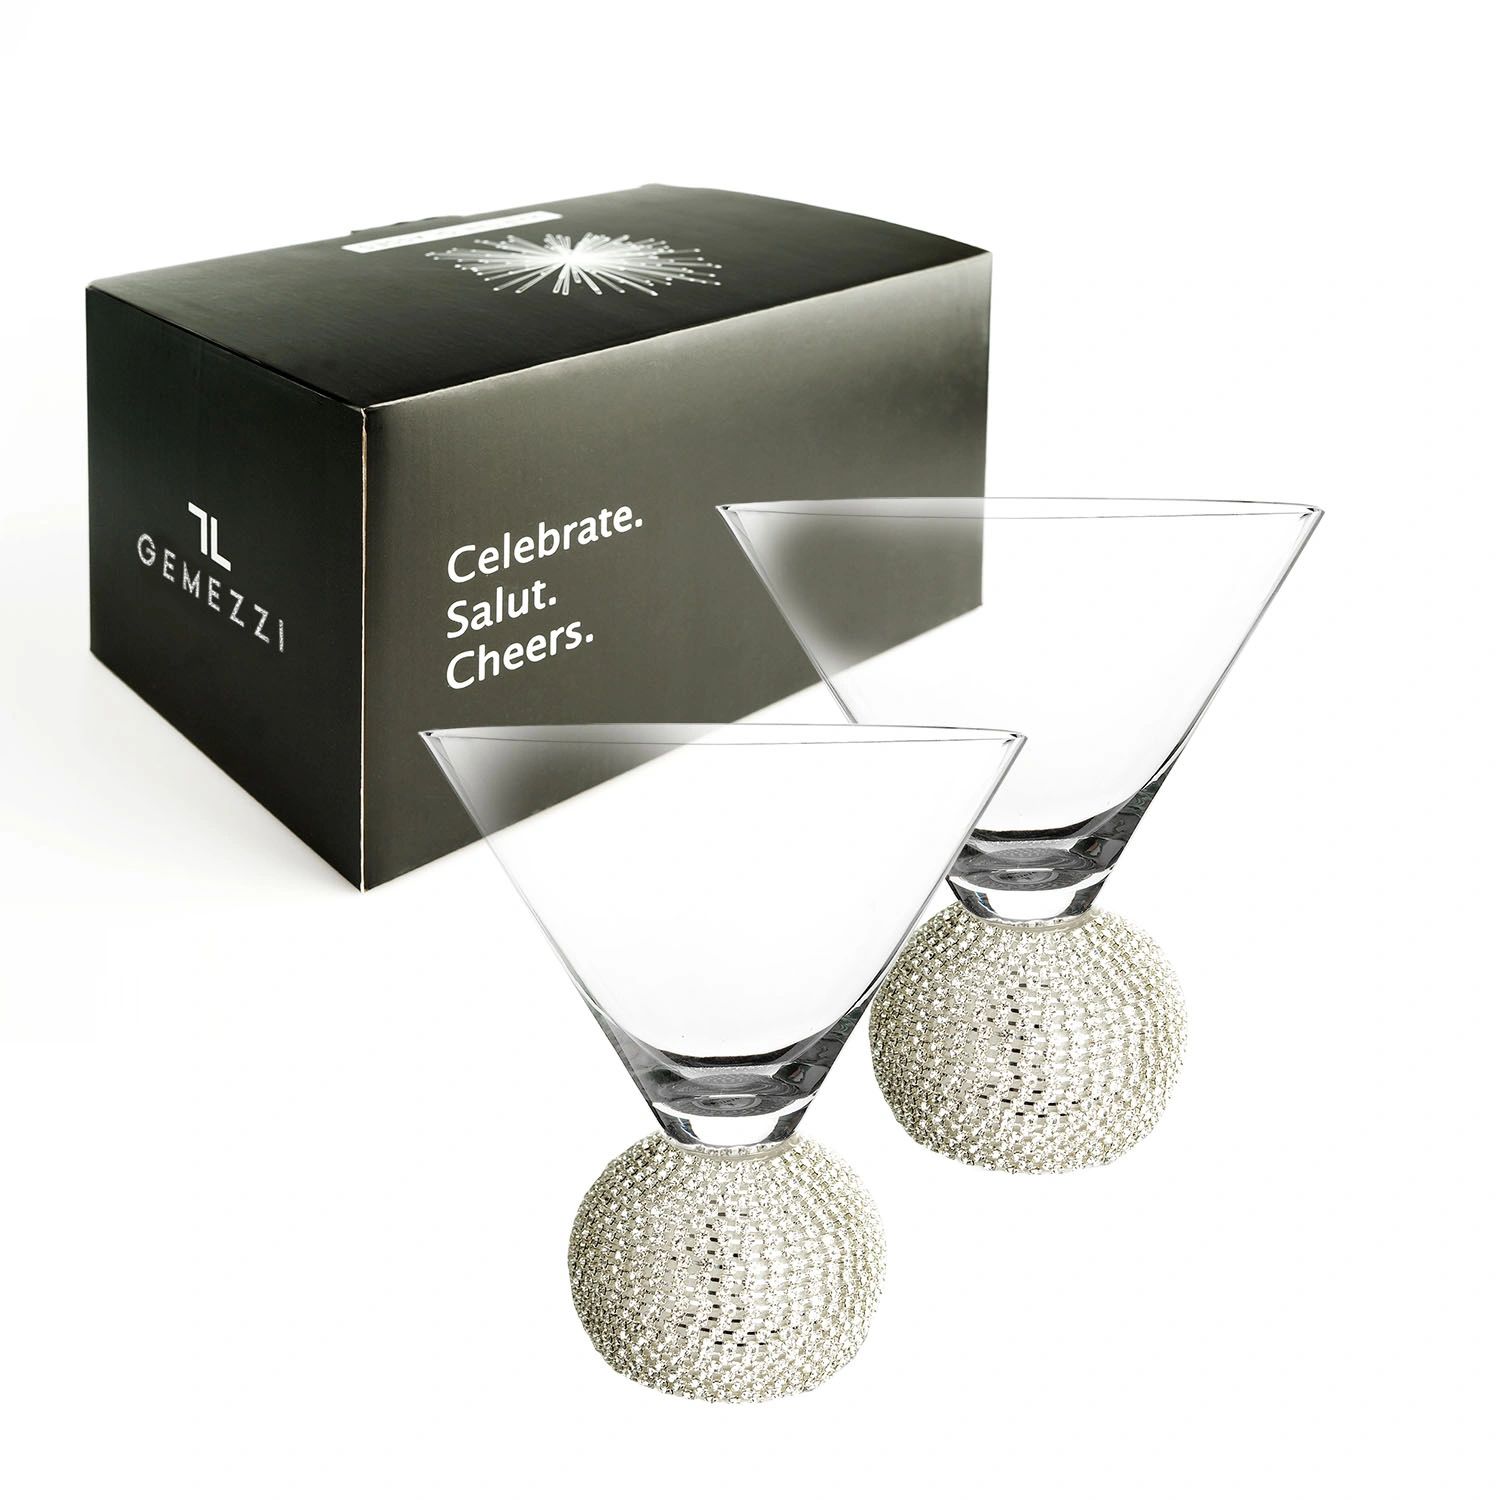 GEMELLO GEMEZZI Stemless Martini Glasses Set of 2, Gold Stemless Cocktail Glass, Crystal Ball Base in Elegant Box, Perfect Bar Accessories for